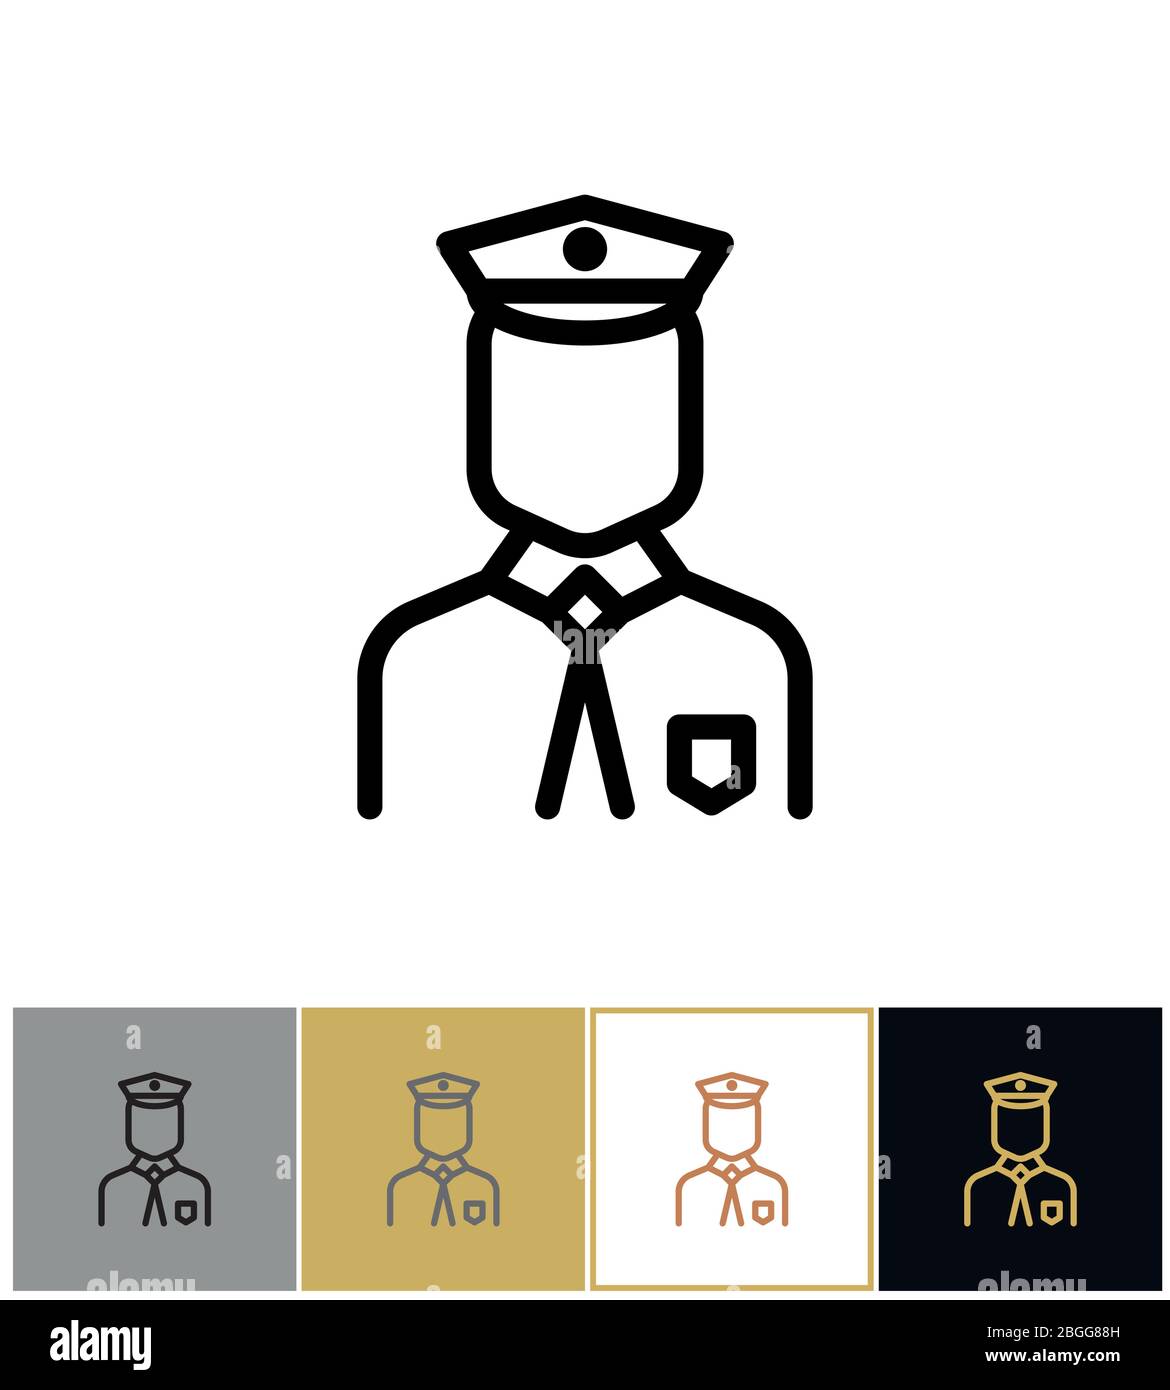 Policeman icon, police uniform man sign or security guard person on gold, black and white backgrounds vector illustration Stock Vector